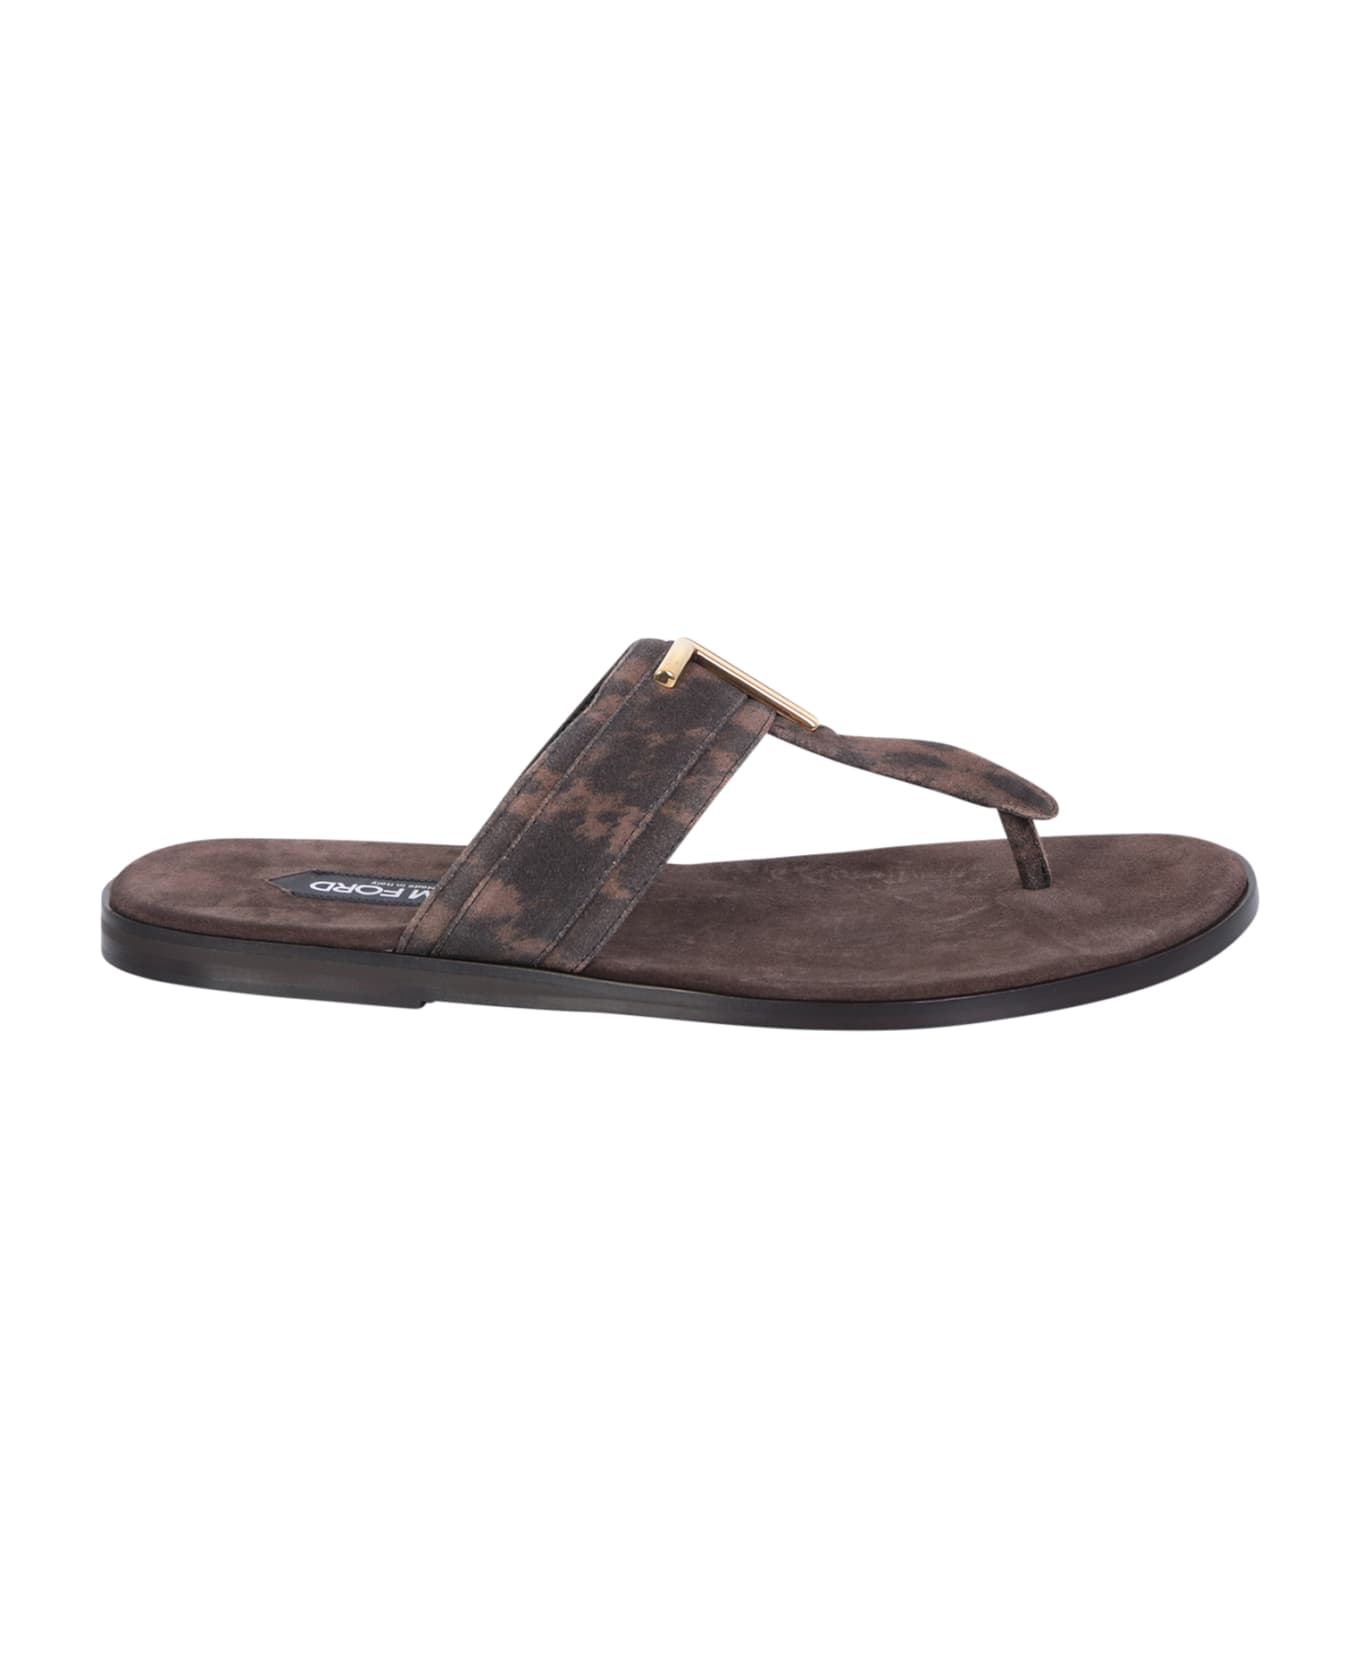 Tom Ford Suede Sandals - Brown